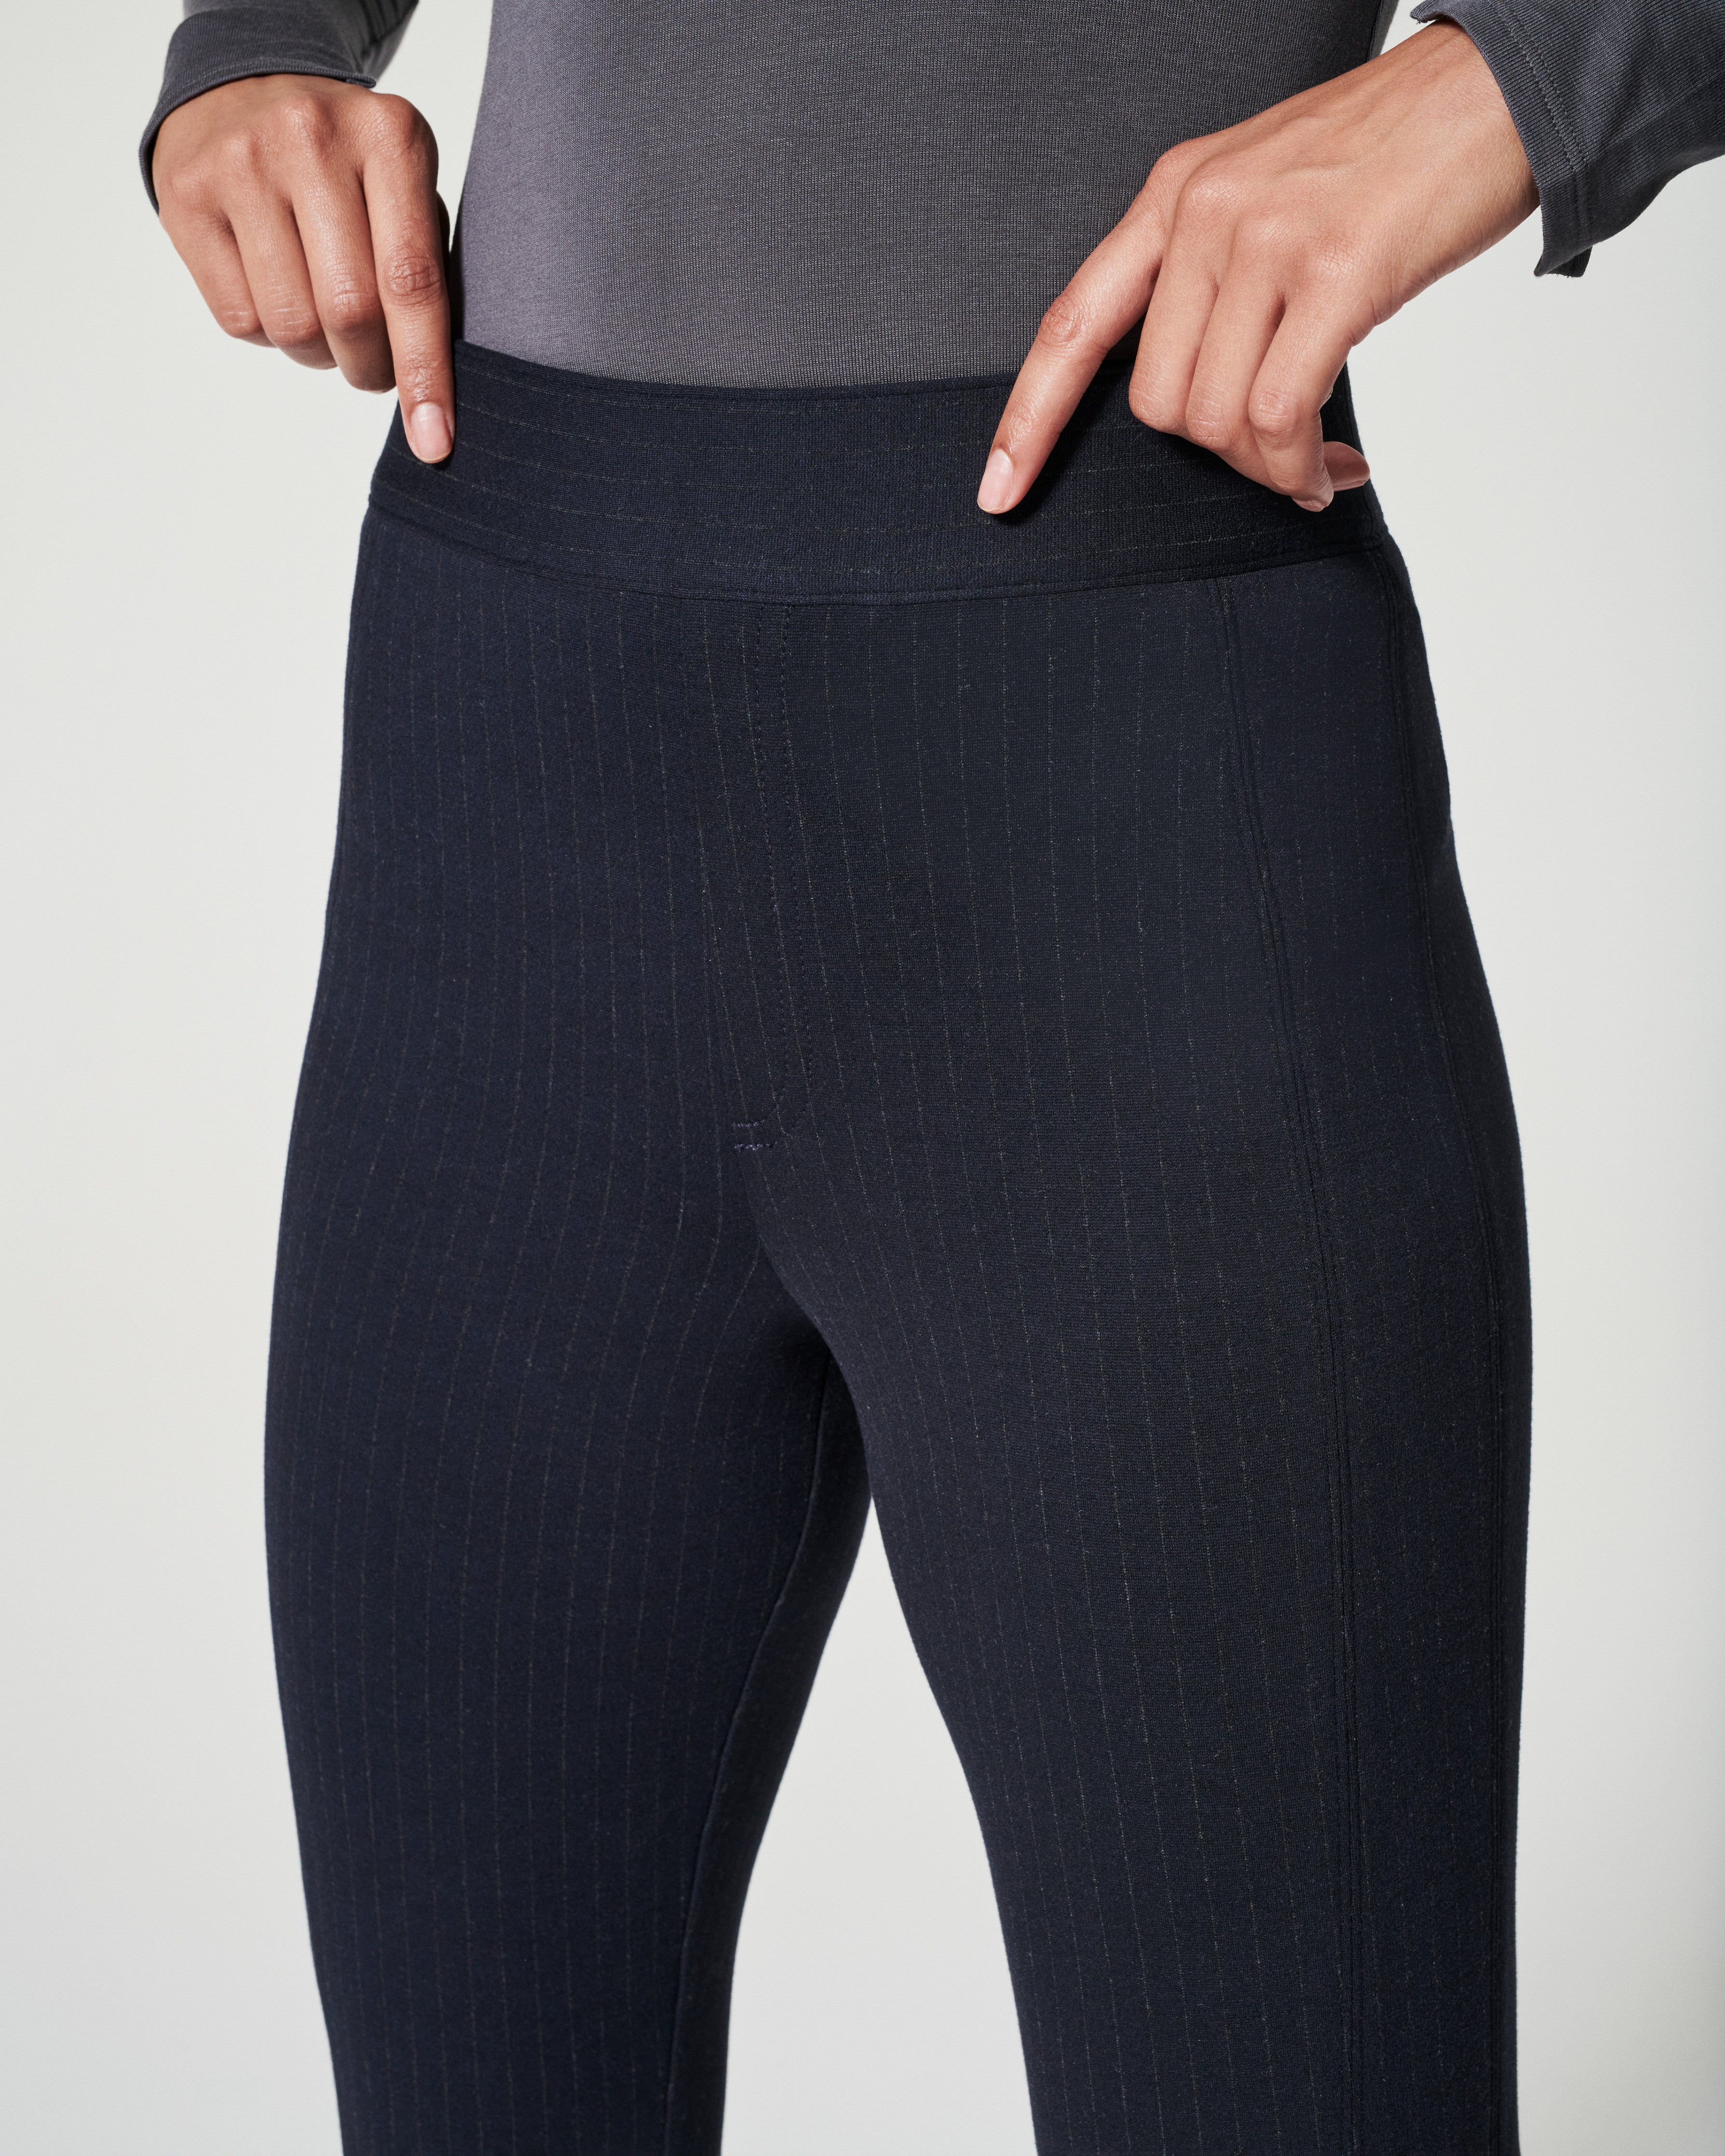 SPANX - Introducing The PERFECT Black Pant Collection. Designed with  buttery-soft fabric, pull-on design, and hidden shaping. Available in petite  and tall in 4 styles.